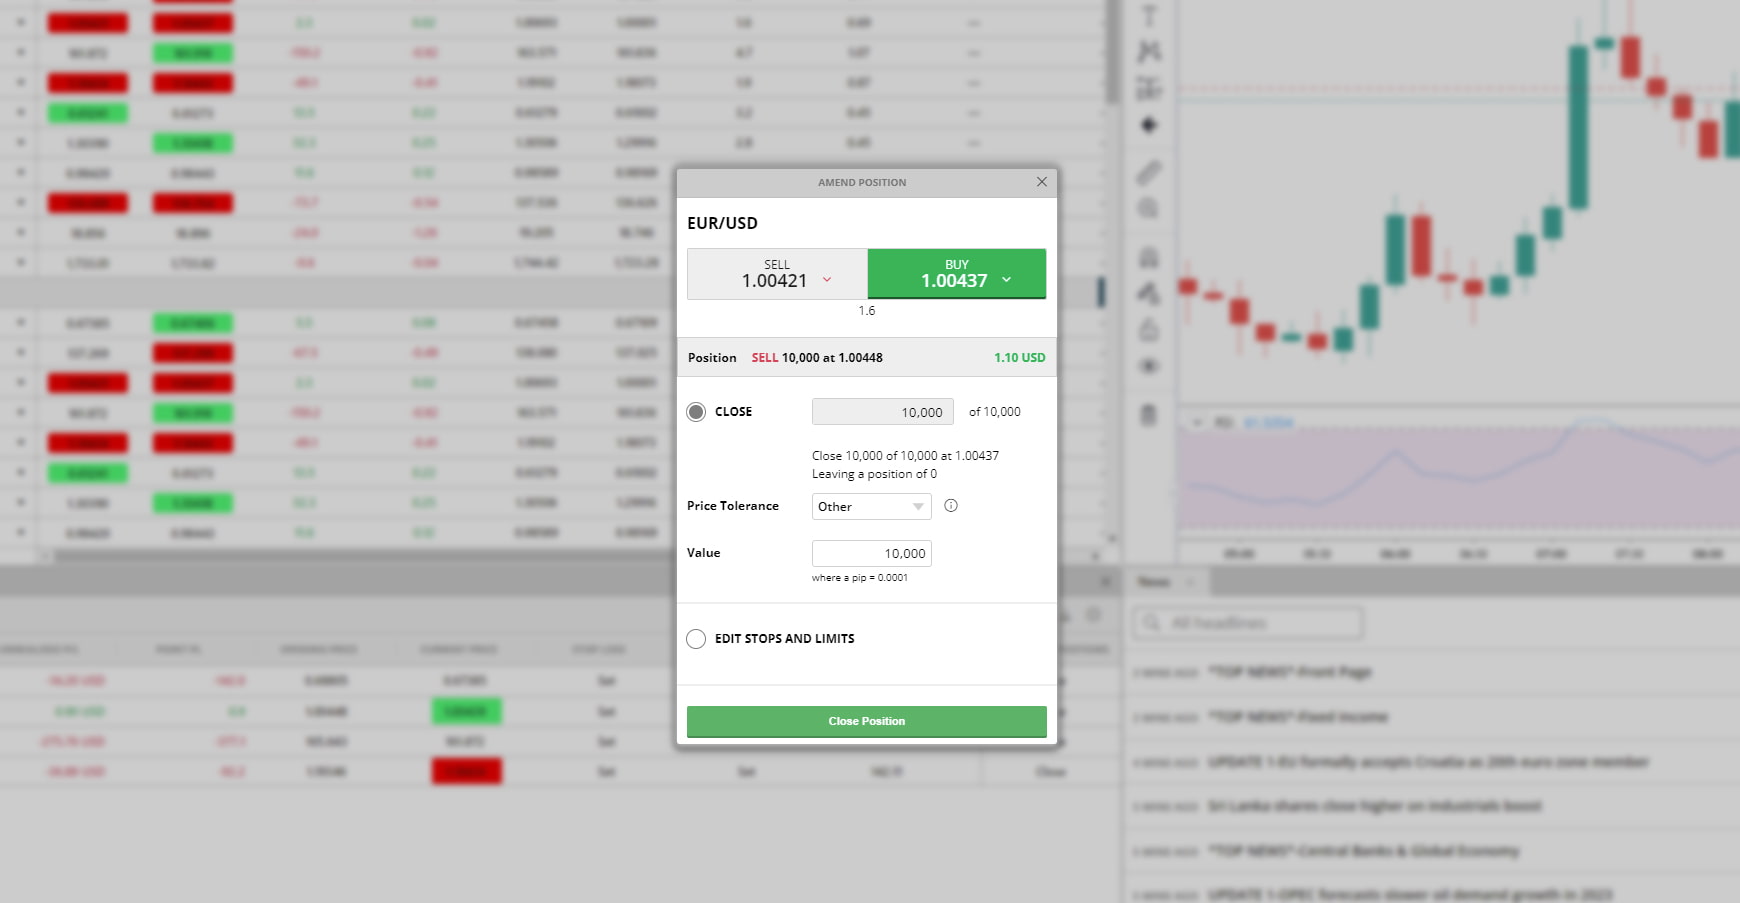 FOREX.com web trader app screen showing the closing position